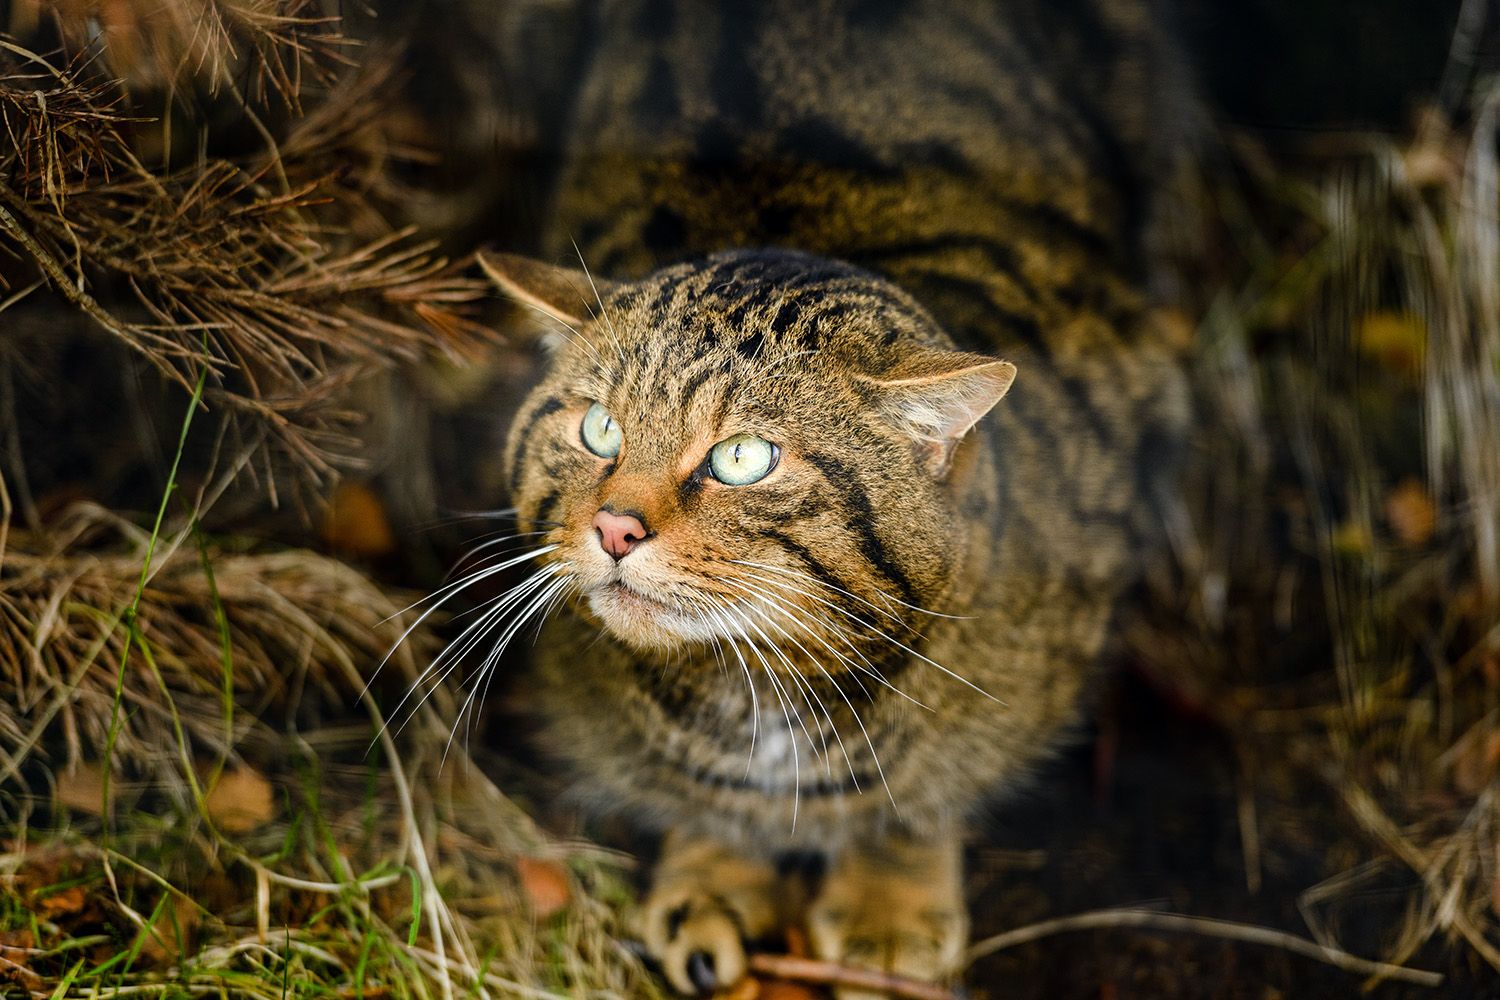 A Scottish wildcat crouched amidst branches in a den, looking up and to the side